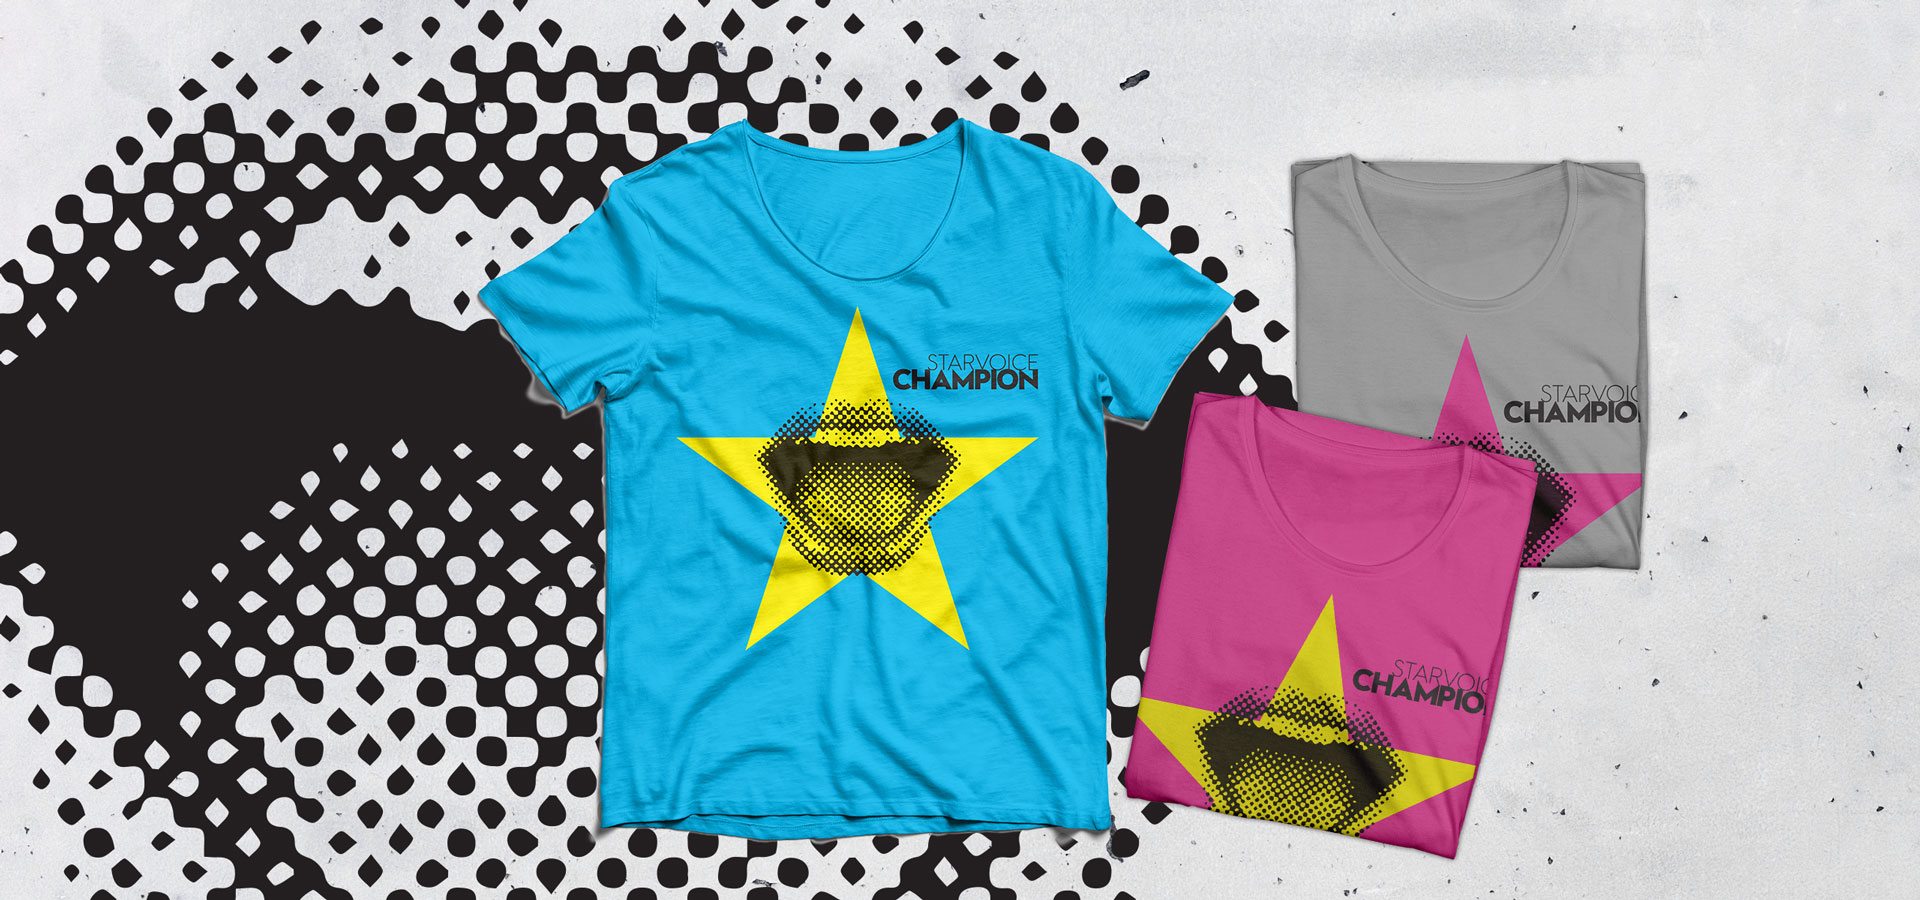 Bright shirt designs for the Starvoice competition